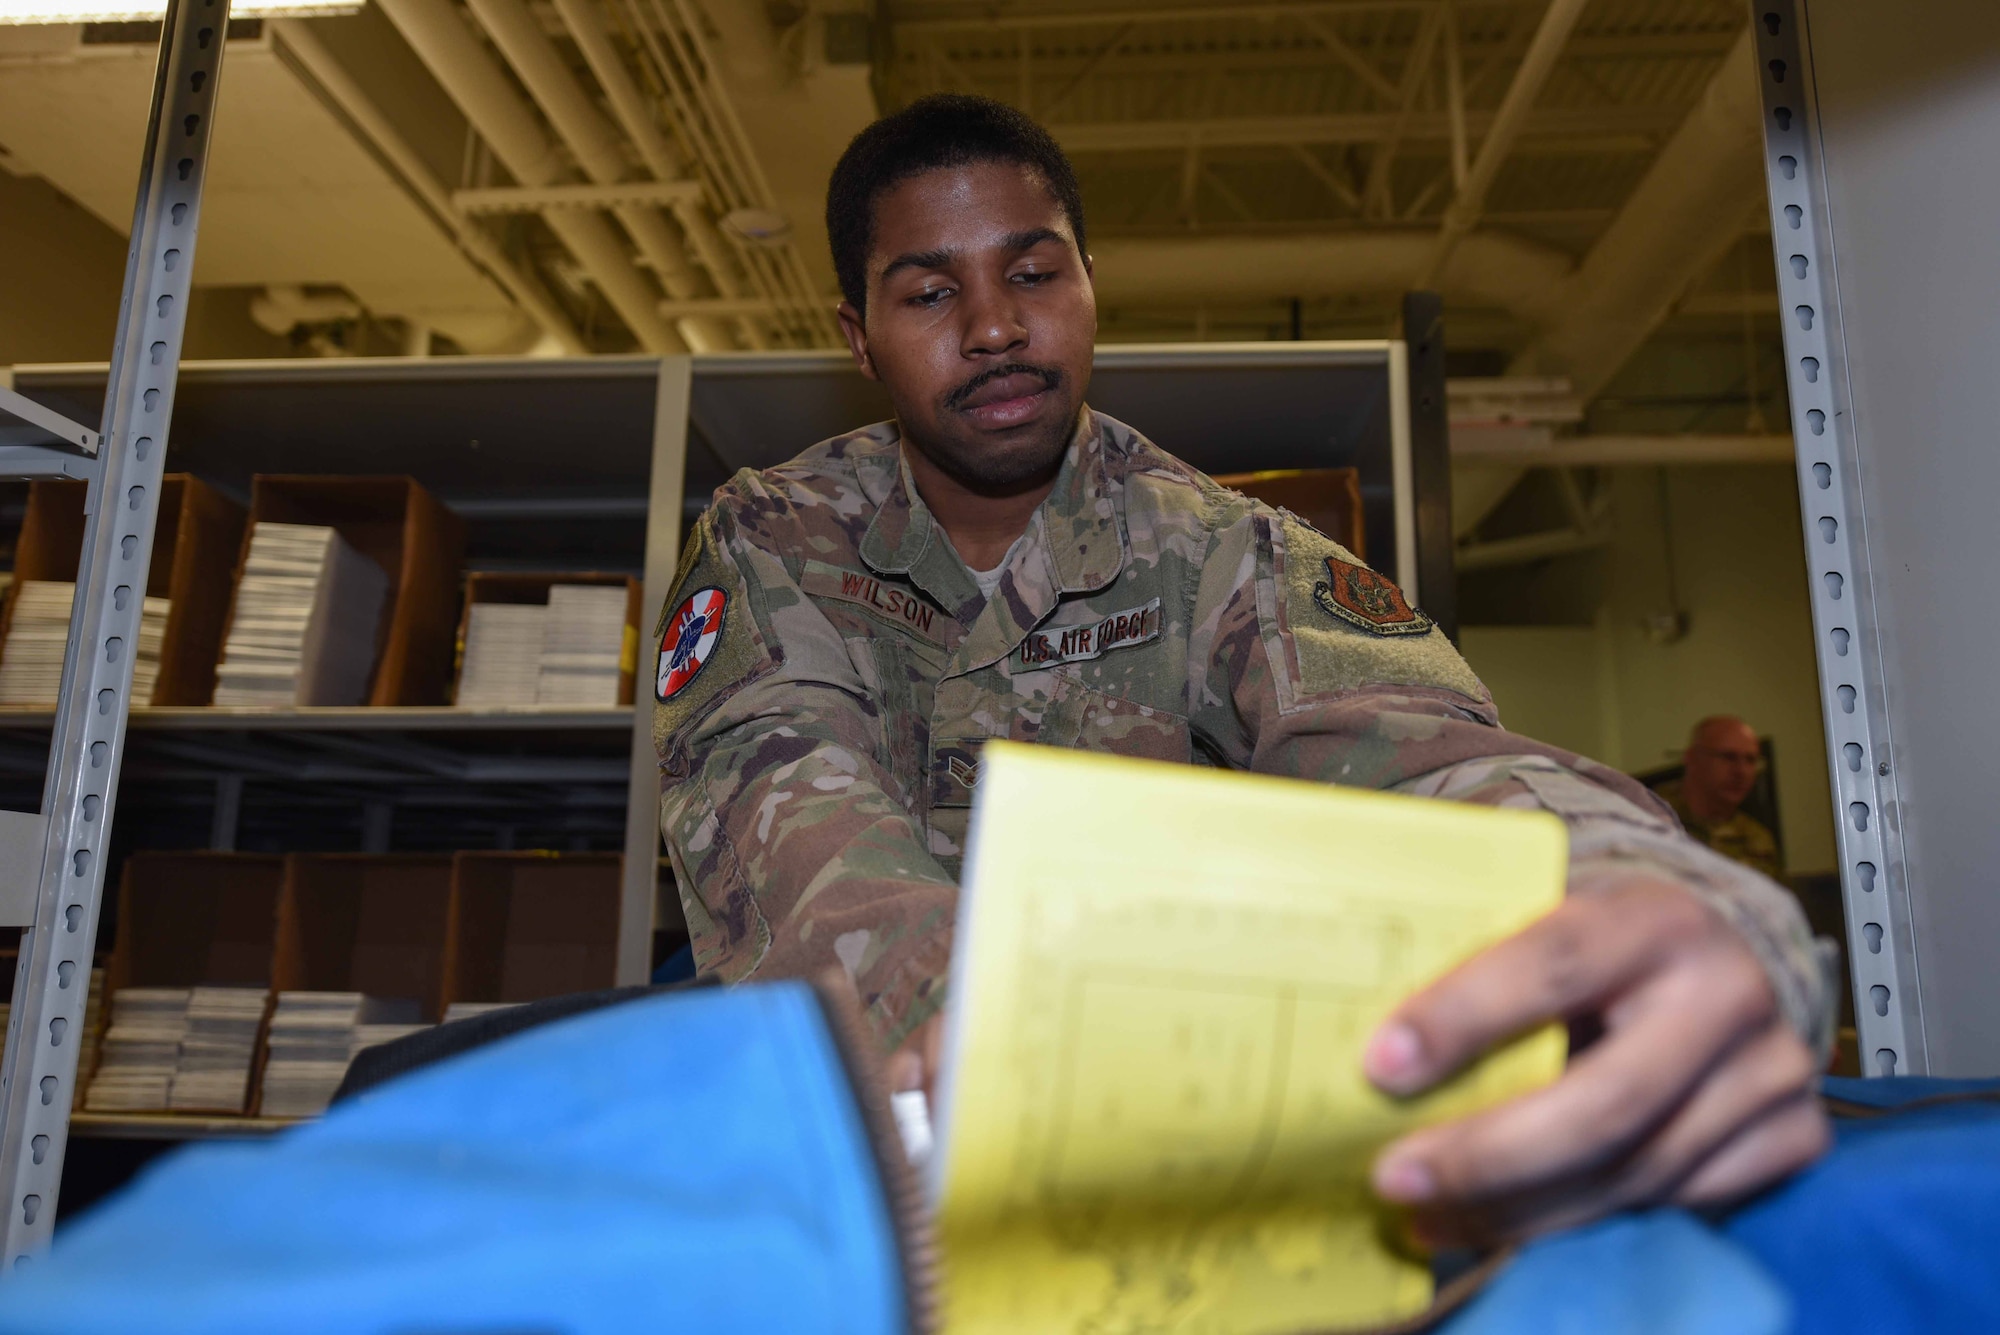 Senior Airman Dwayne Wilson, 22nd Operations Support Squadron combat crew communications technician, looks through a Worldwide Flight Information Publication bag Oct. 30, 2019, at McConnell Air Force Base, Kan. The combat crew communications shops’ main goal is to ensure the security of all aircrew communications during their flights. This includes training aircrew on the use of a variety of materials to help securely talk over the air. (U.S. Air Force photo by Airman 1st Class Alexi Bosarge)